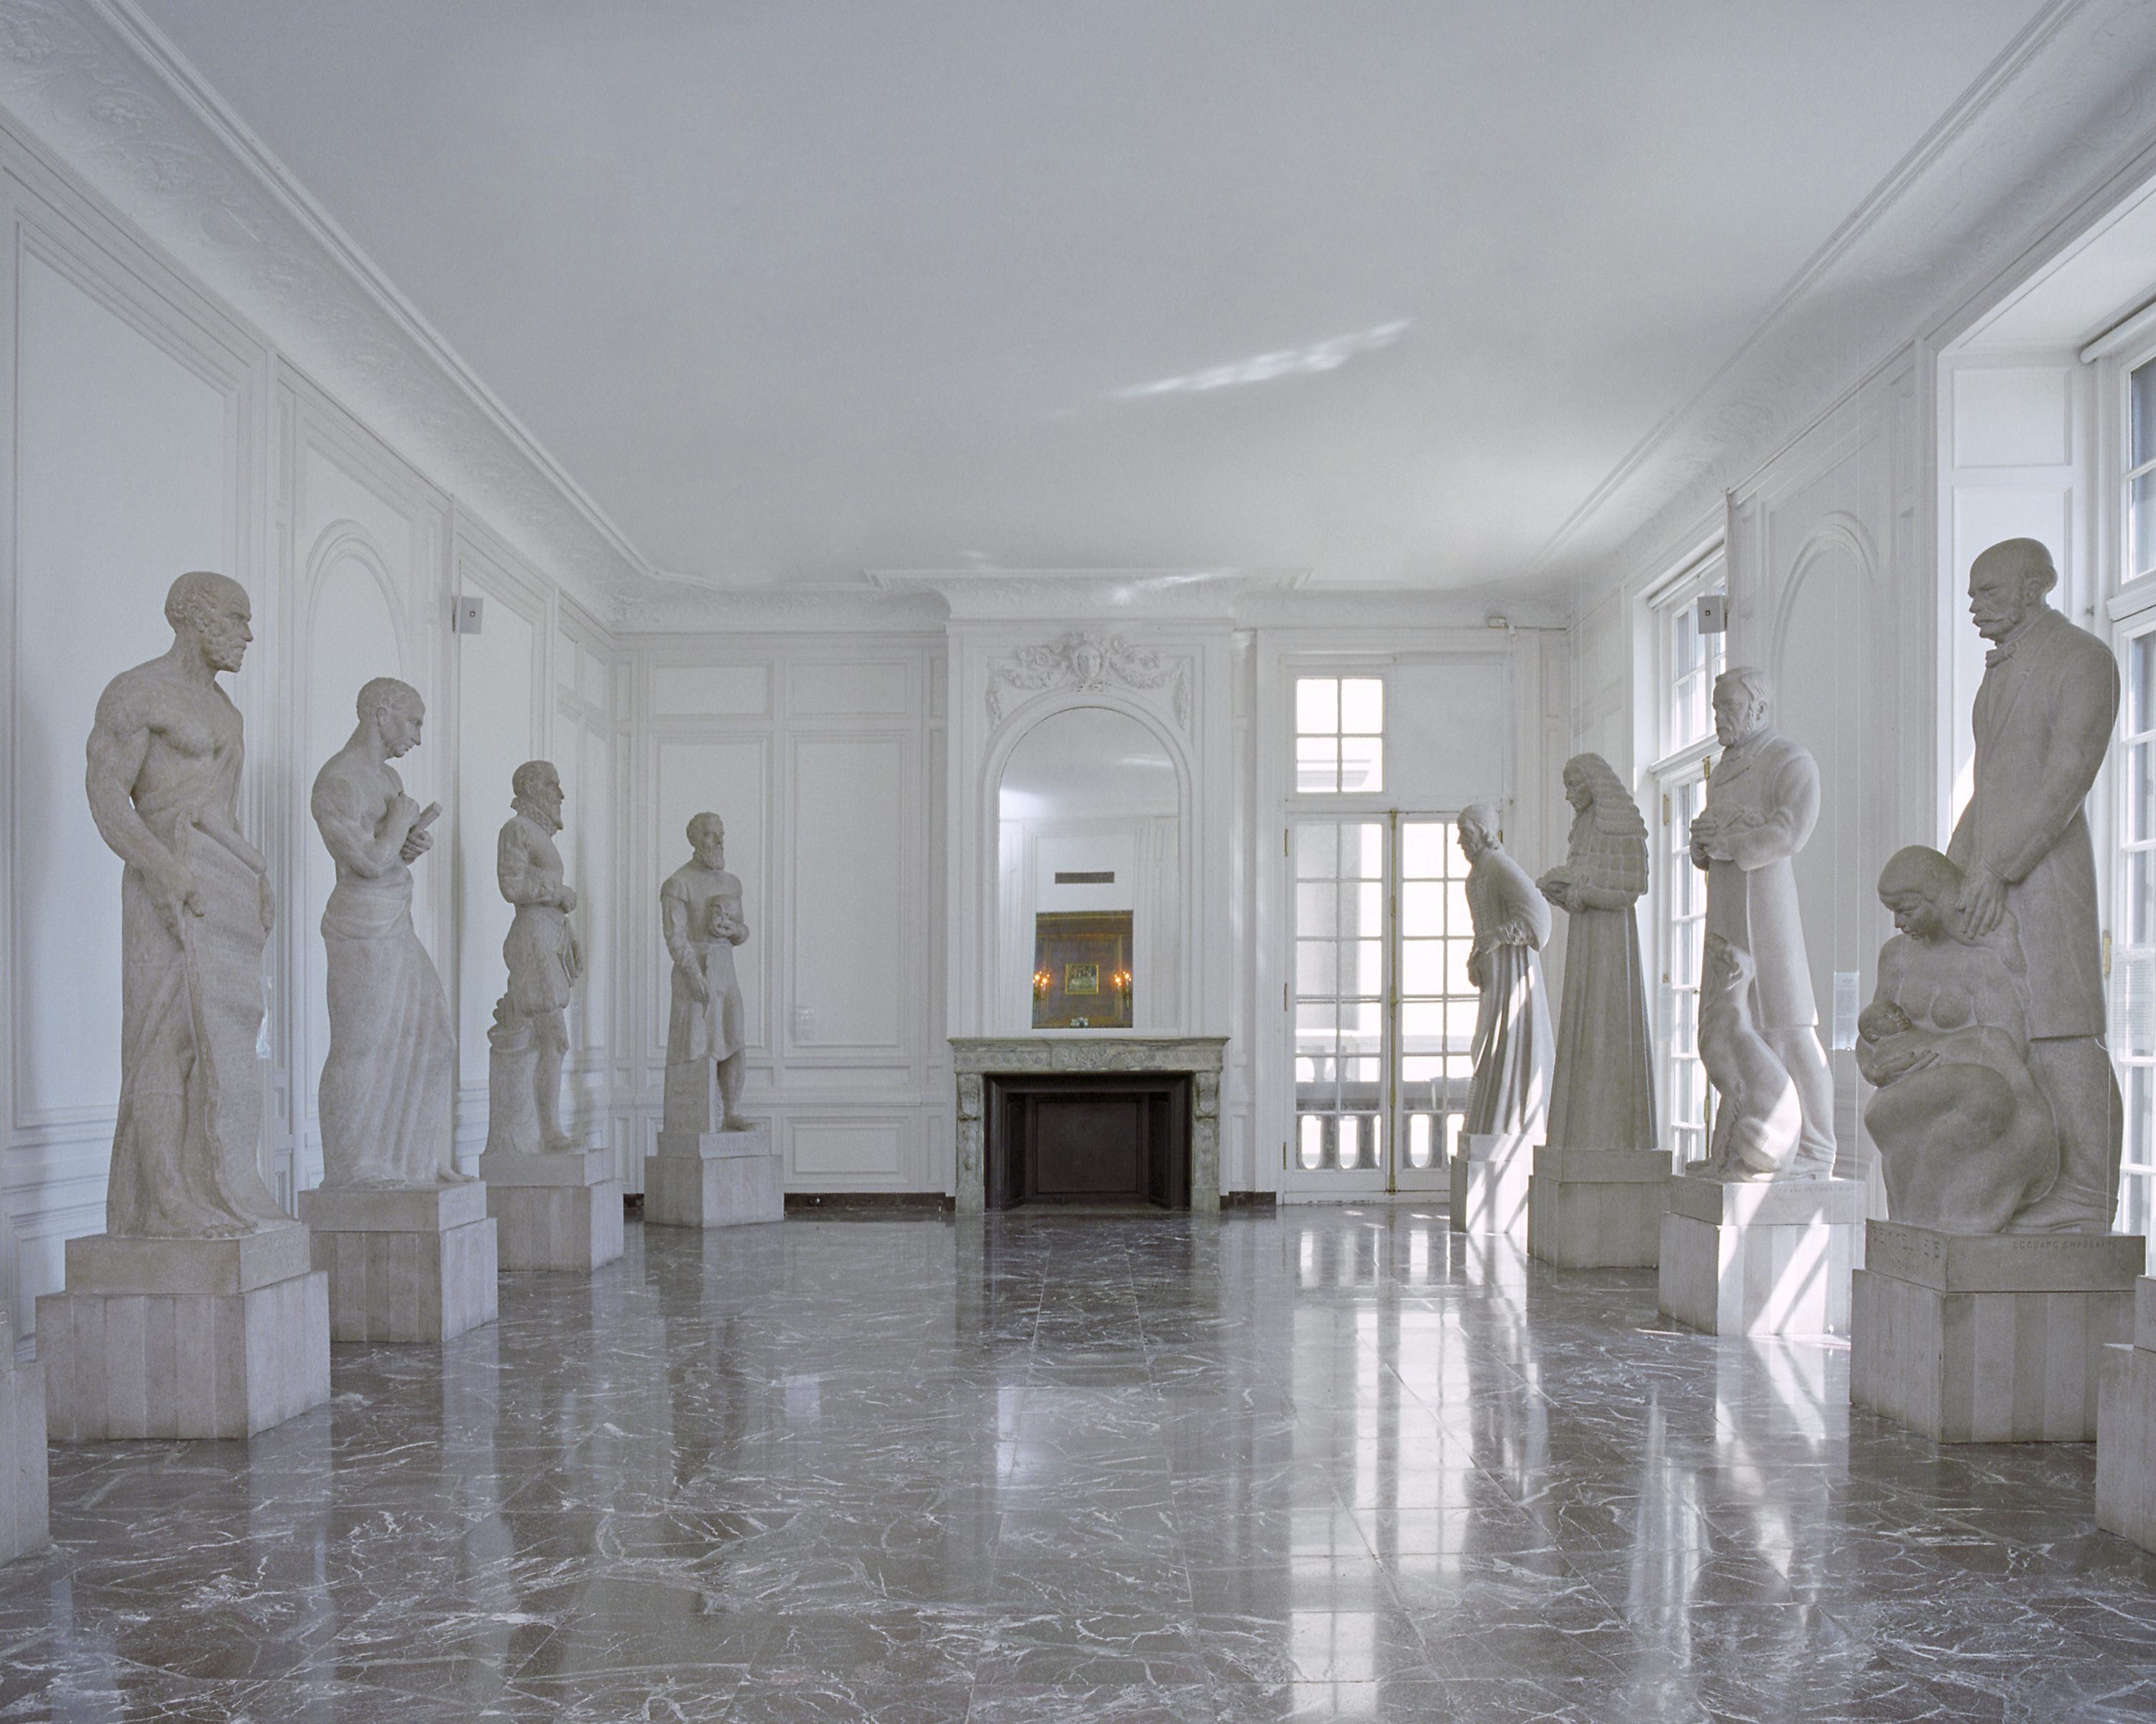 Color photo of the Hall of Immortals. Seven stone sculptures can be seen of different people from medical history.